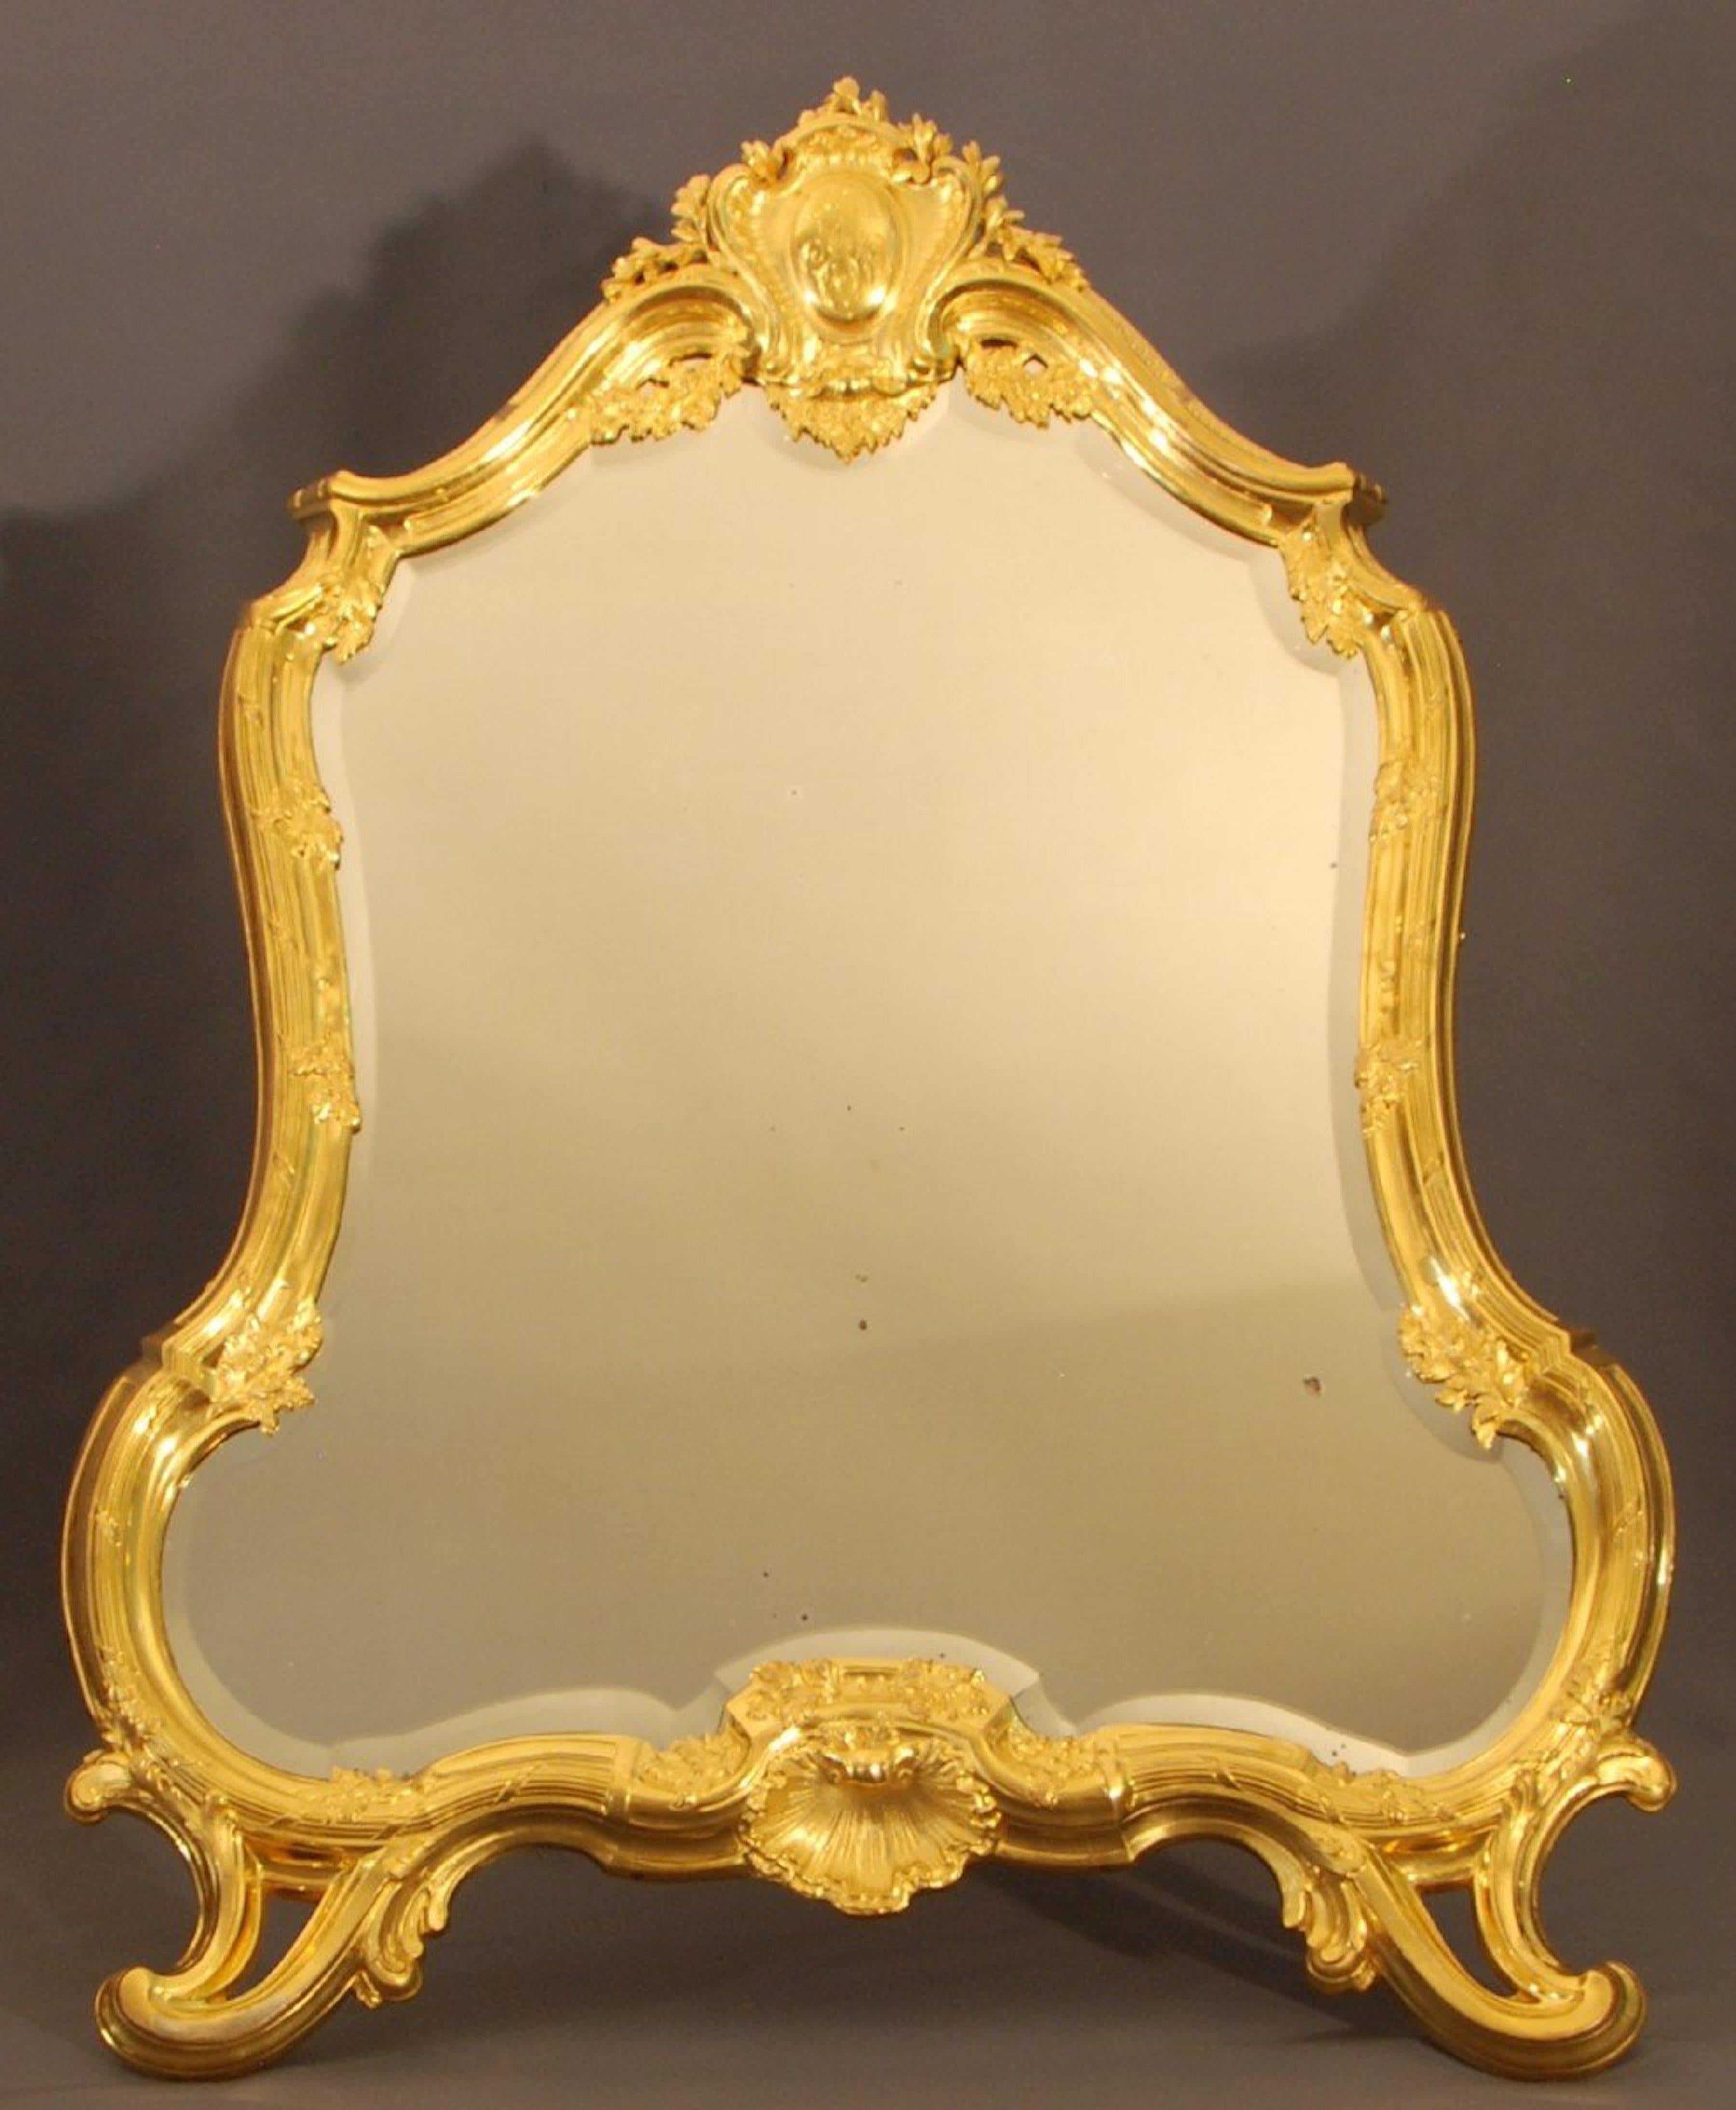 A toilet mirror in chiseled and gilded bronze, the bevelled mirror is surrounded by a moulding adorned with foliage scrolls. 
The feet in volutes frame a shell, with damping a coat of arms engraved with intials. 
On the back, a bronze square adjusts